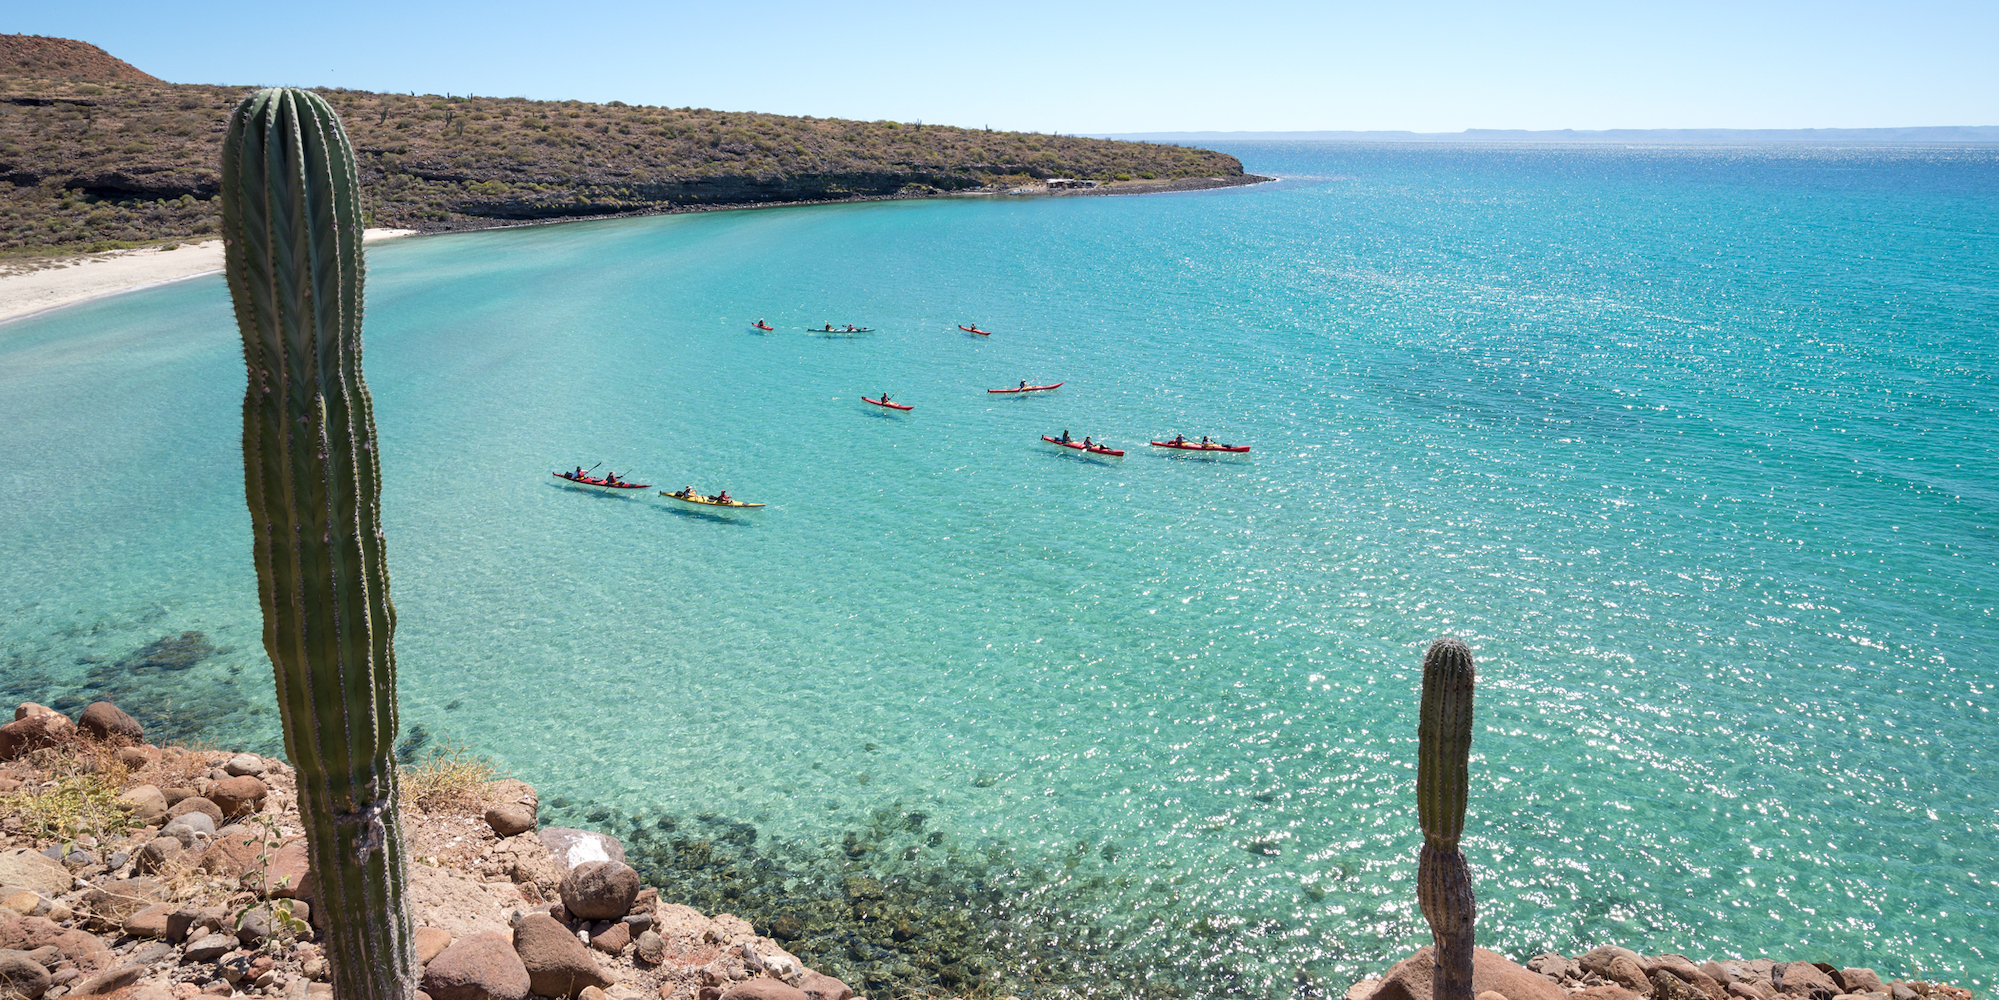 Panoramic view of sea kayakers and cacti on the Sea of Cortez